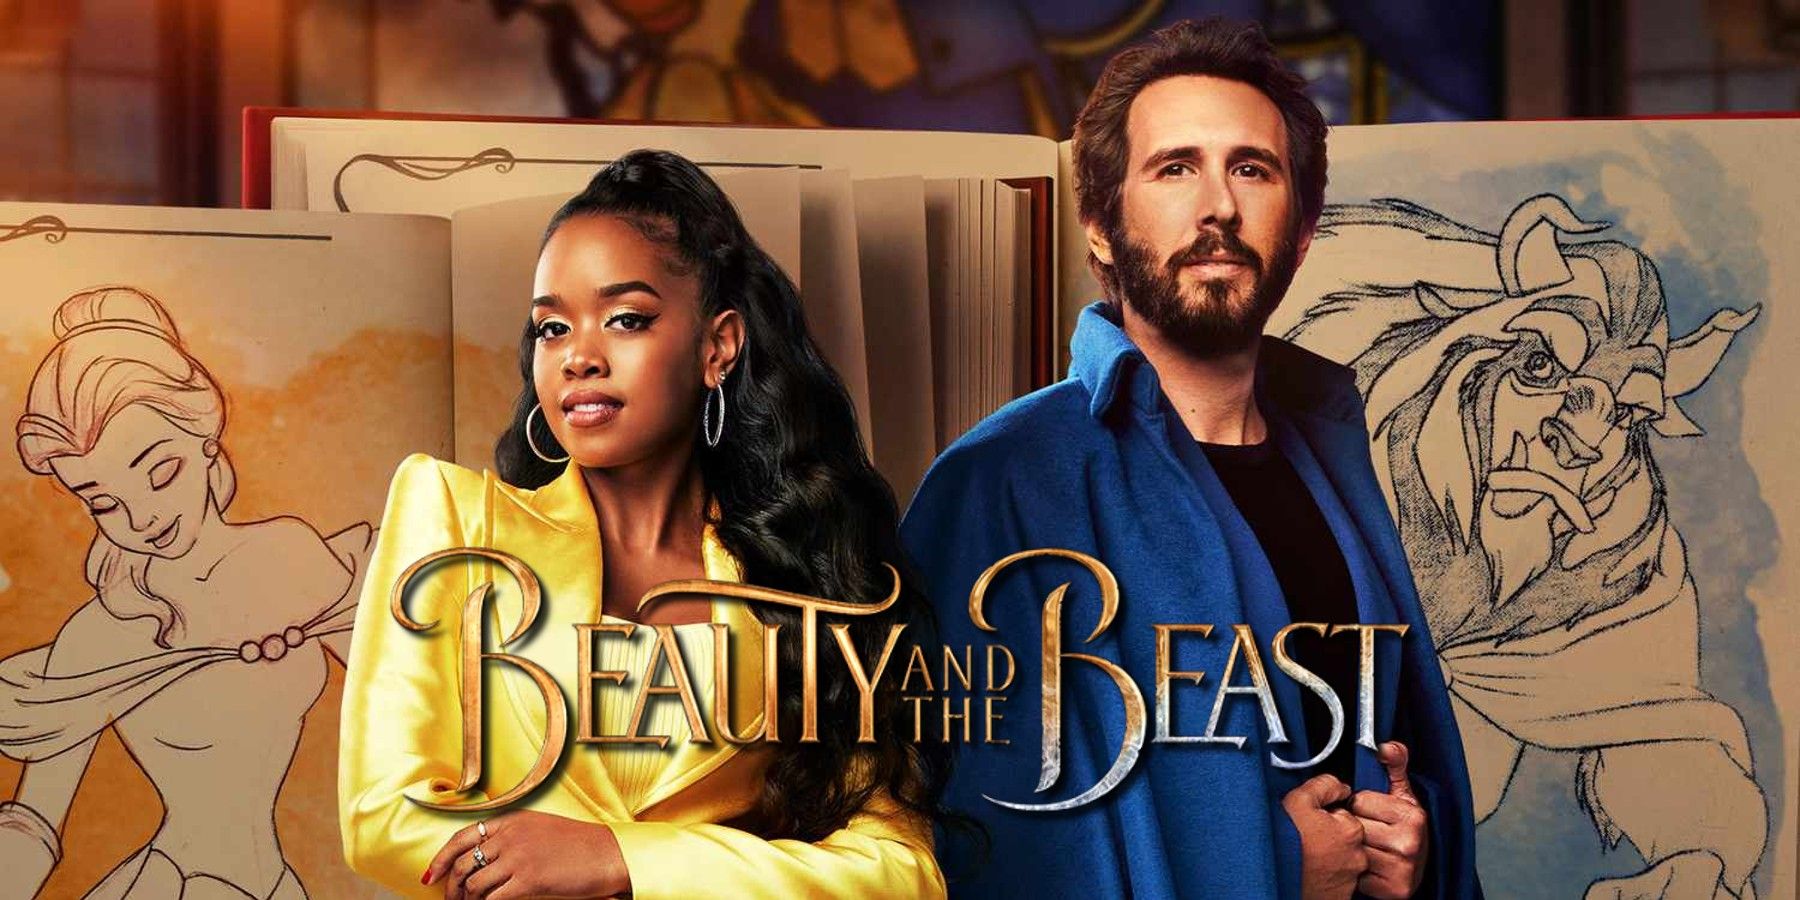 Beauty and the Beast 30th anniversary special celebration Josh Groban H.E.R. Her Belle